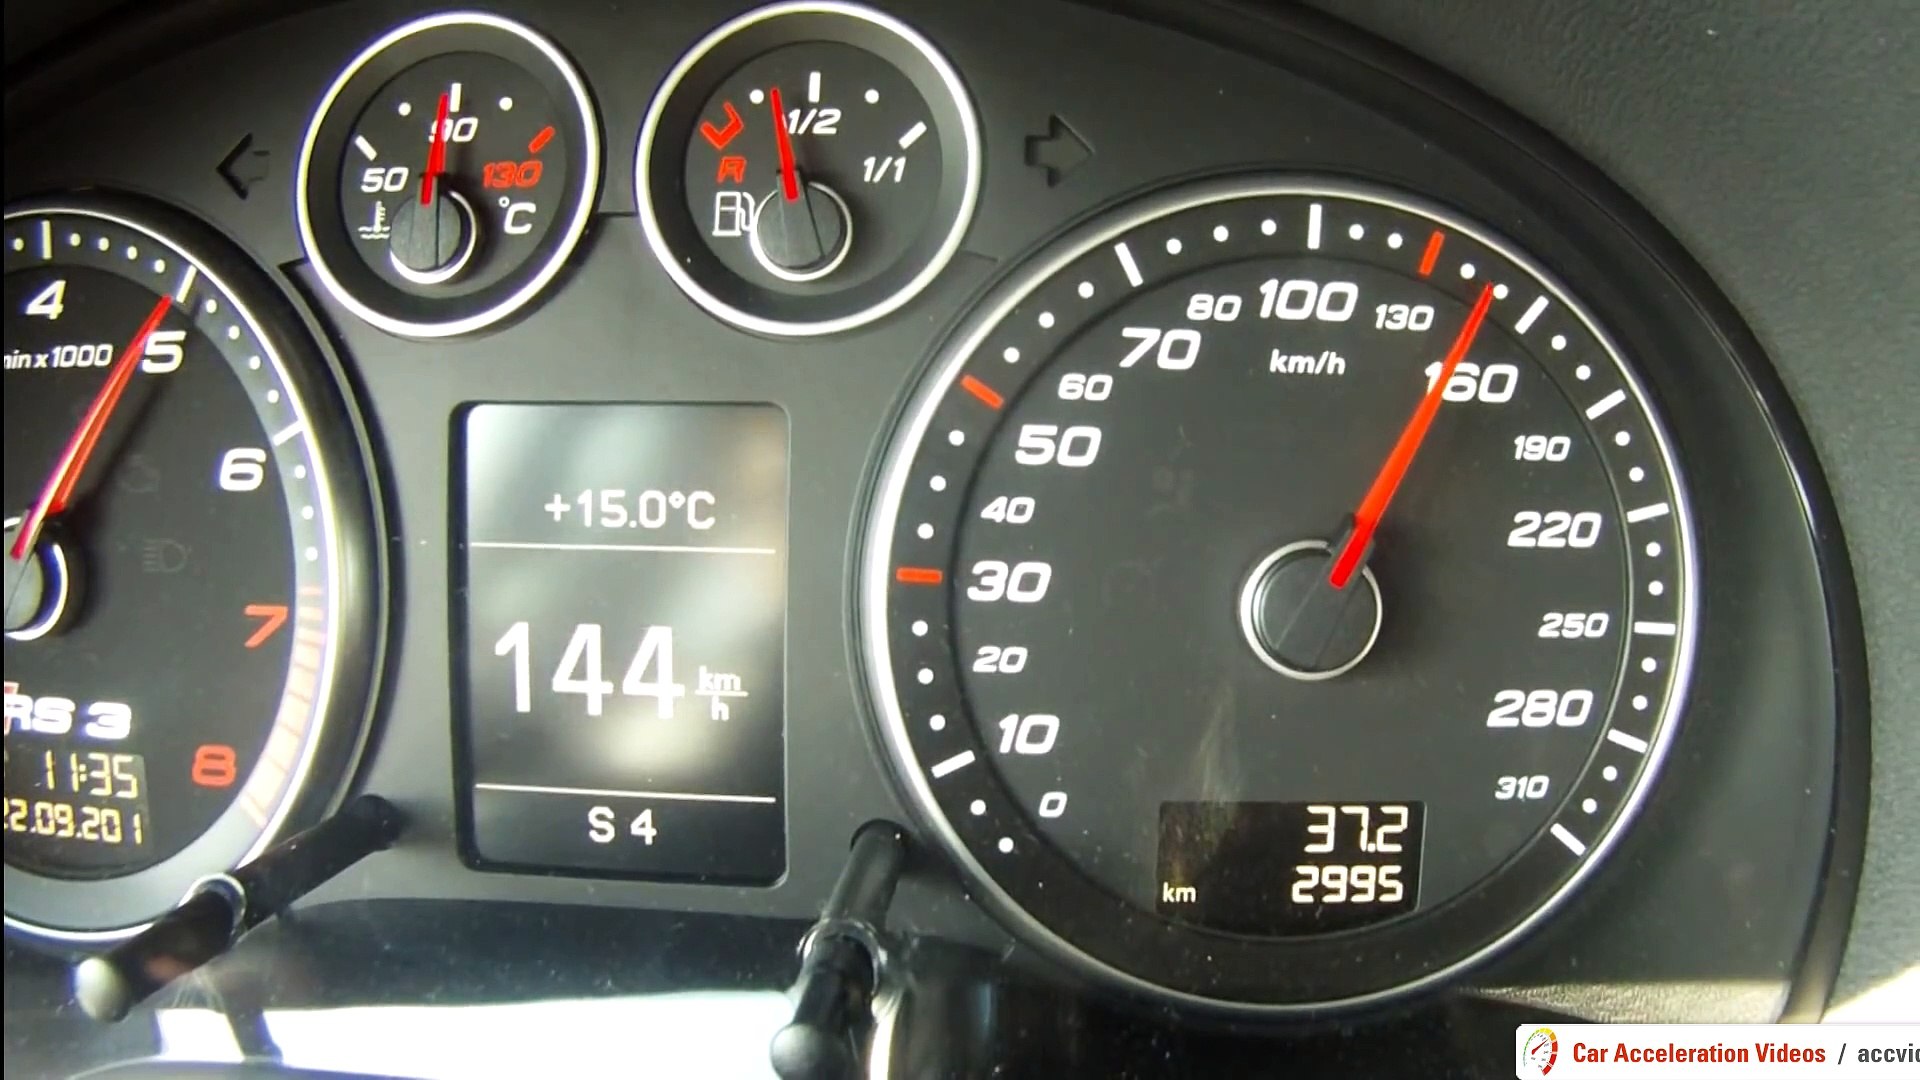 Audi RS3 MTM (472 HP) 0-200 km/h Acceleration - video Dailymotion